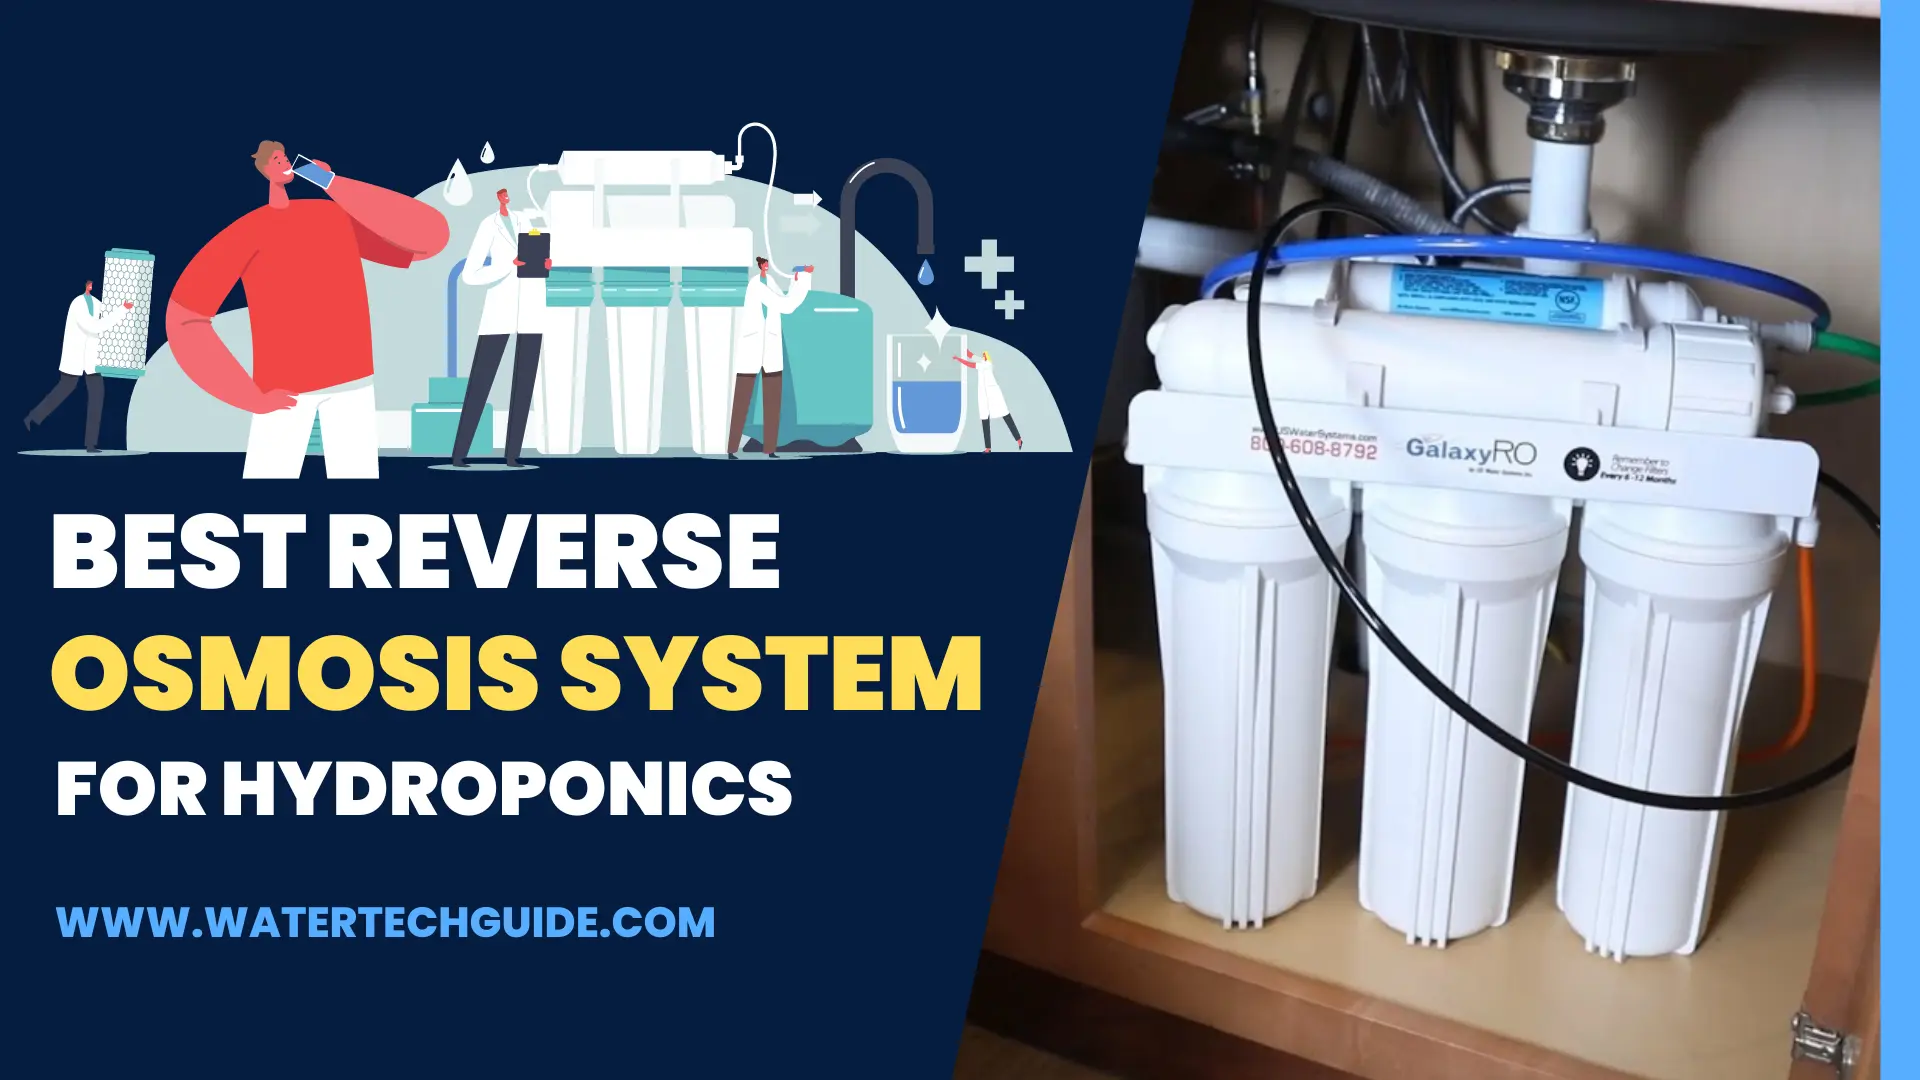 Best Reverse Osmosis System for Hydroponic